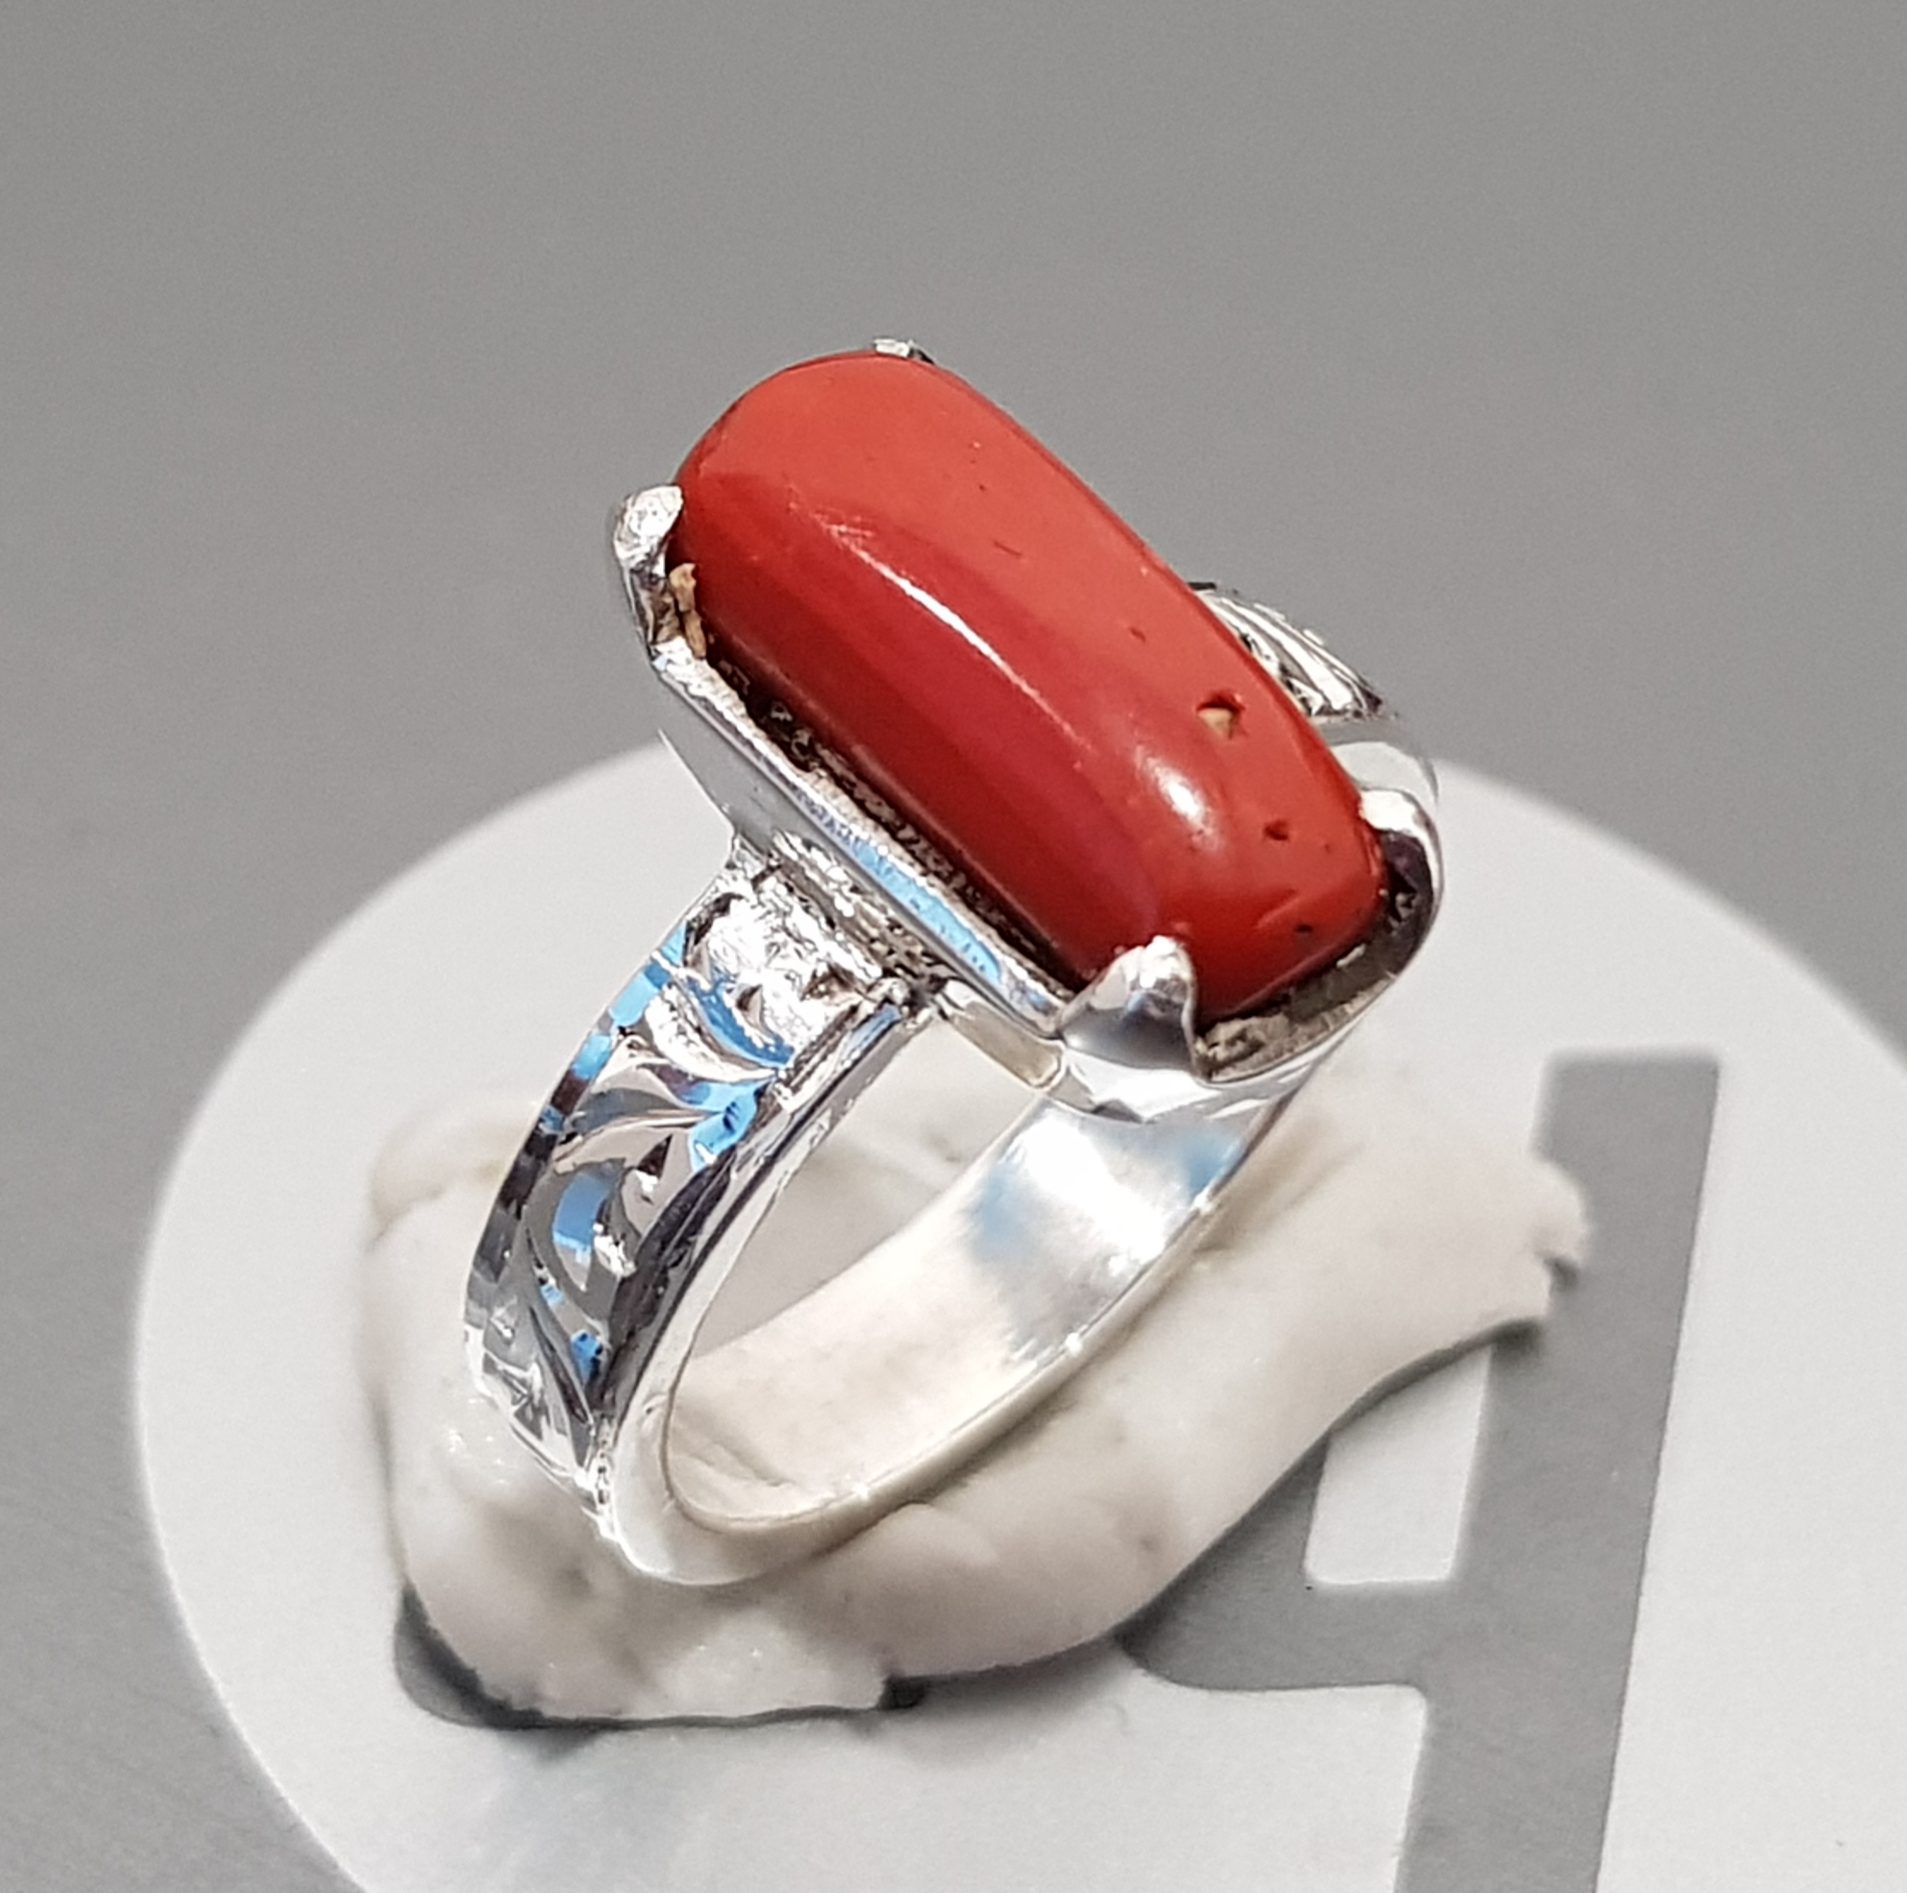 KJJEAXCMY boutique jewelry 925 sterling silver inlaid natural red coral  female ring support test - AliExpress